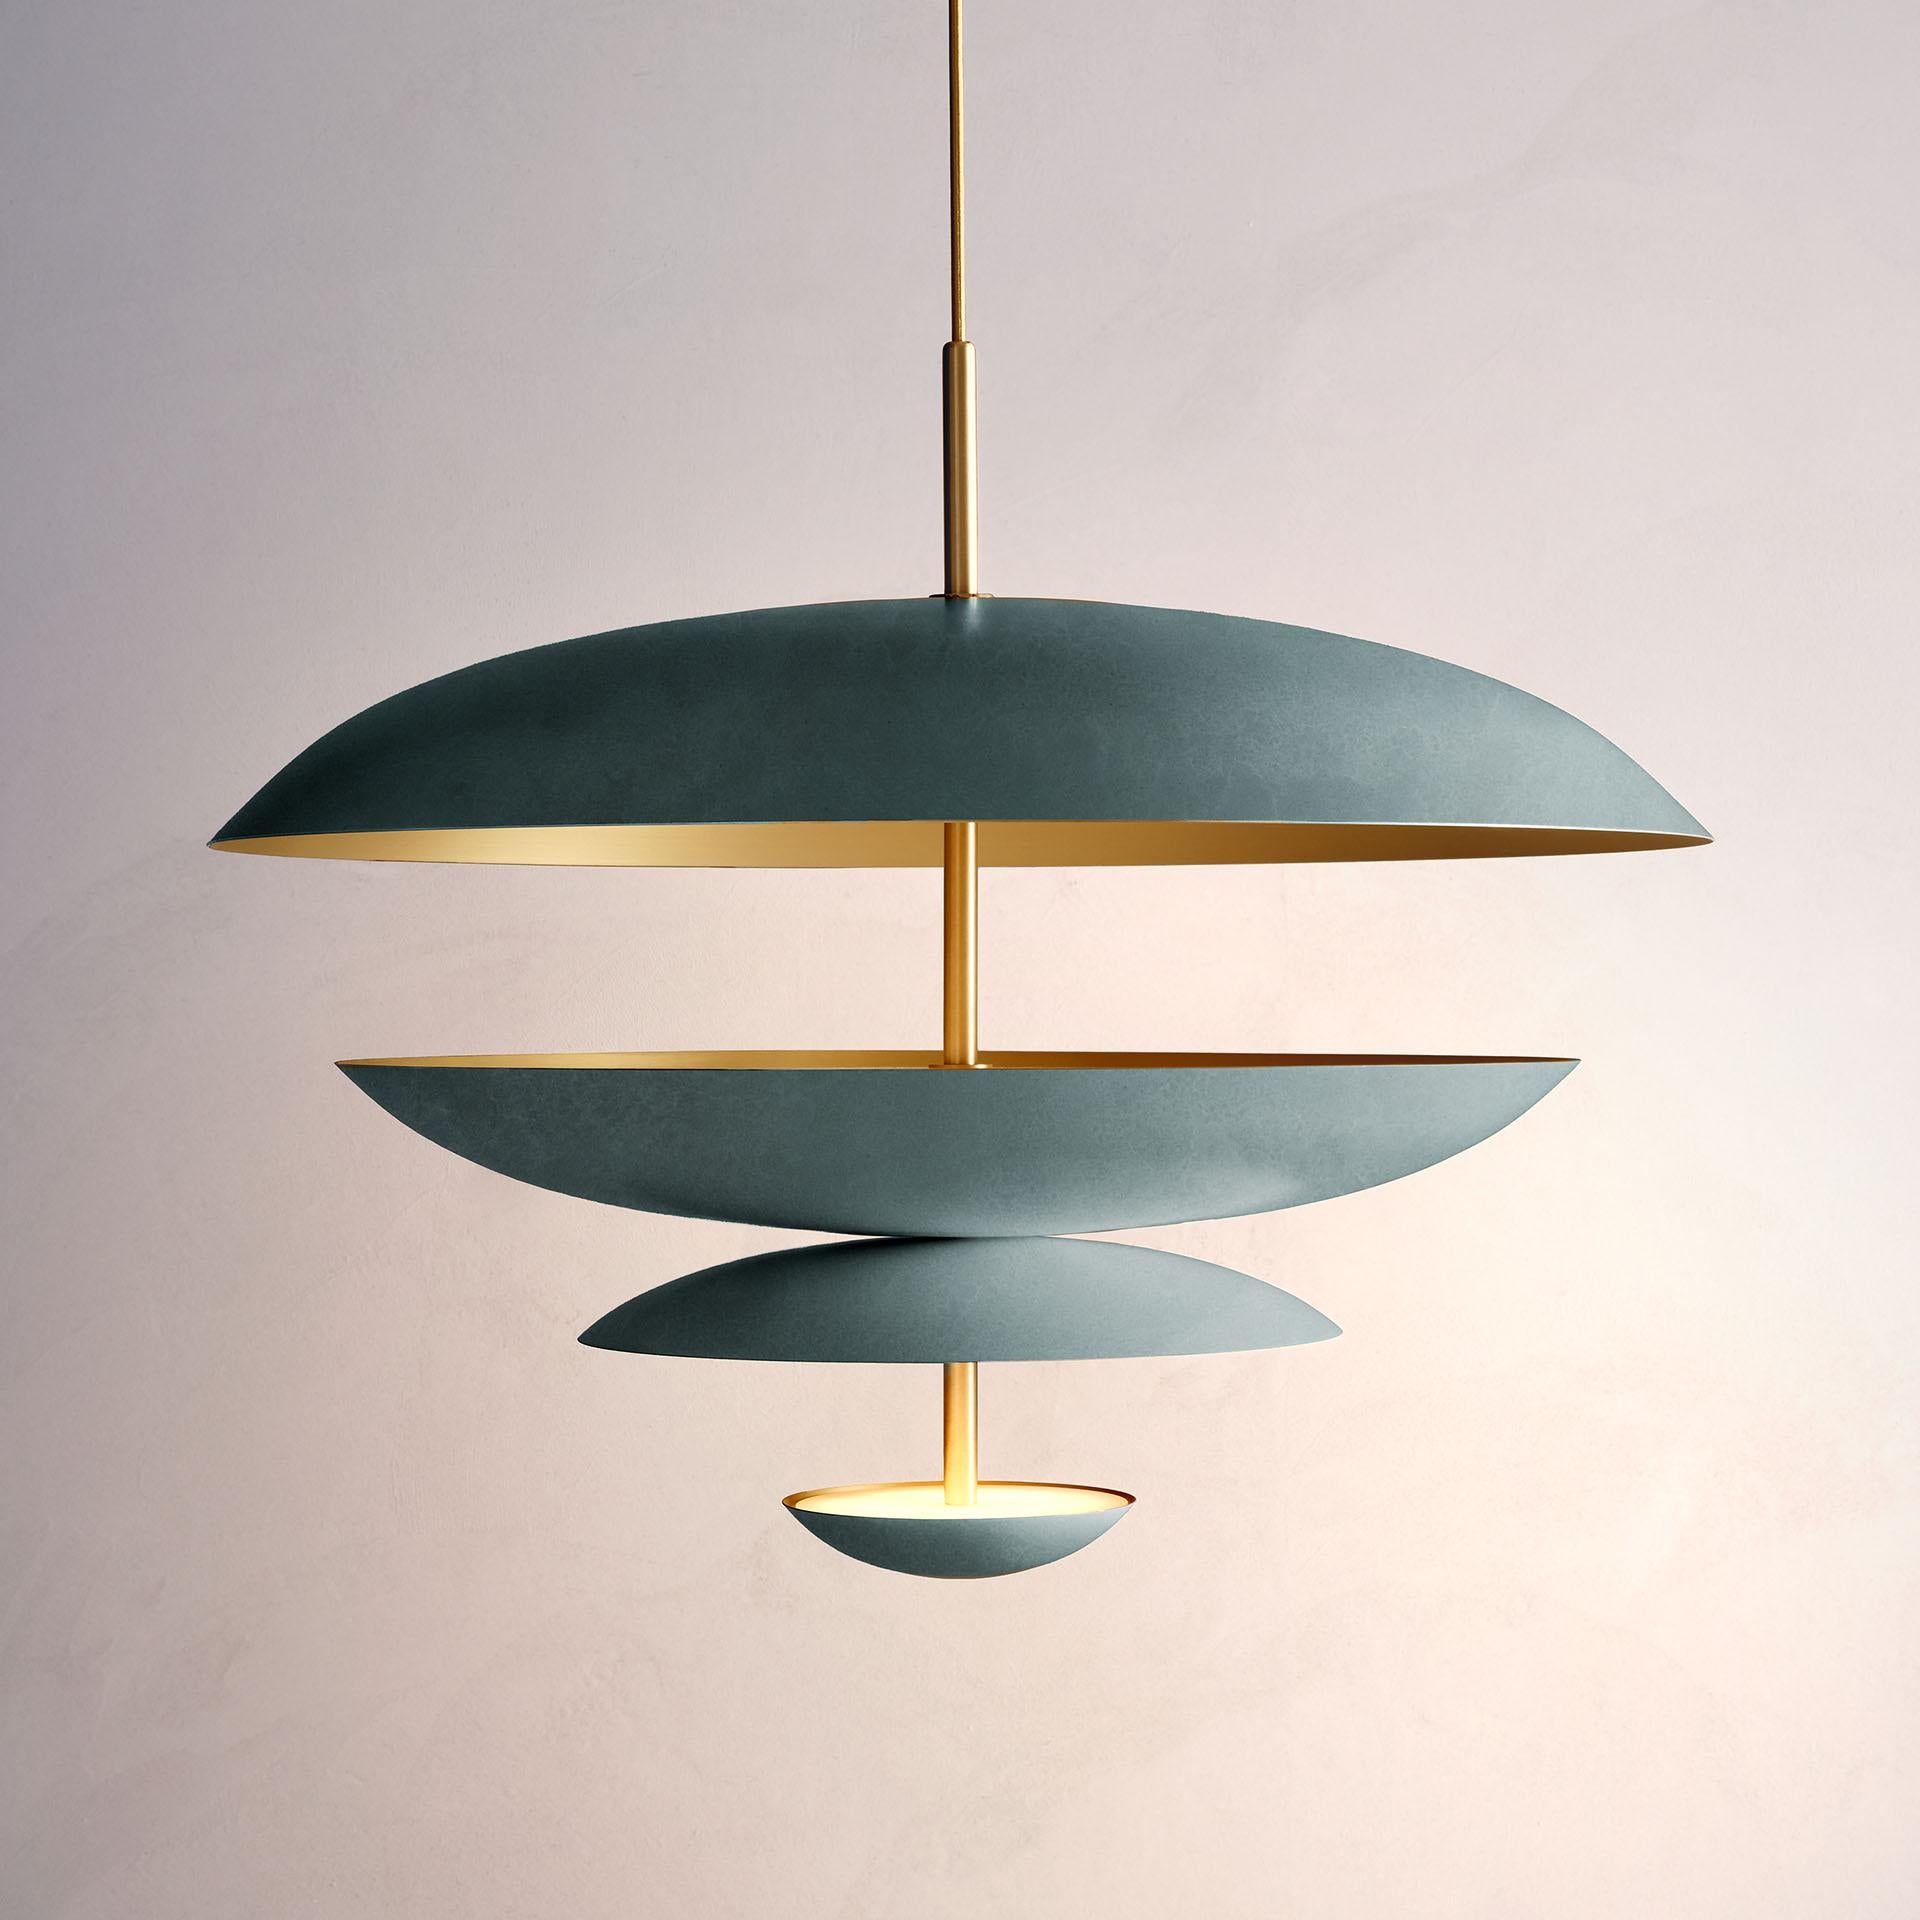 Inspired by planet-like shapes and textures, the Cosmic collection plays with both metal properties and a selection of patina finishes. The Verdigris Chandelier is inspired by the beautiful textures found within nature. A mixed verdigris patina is